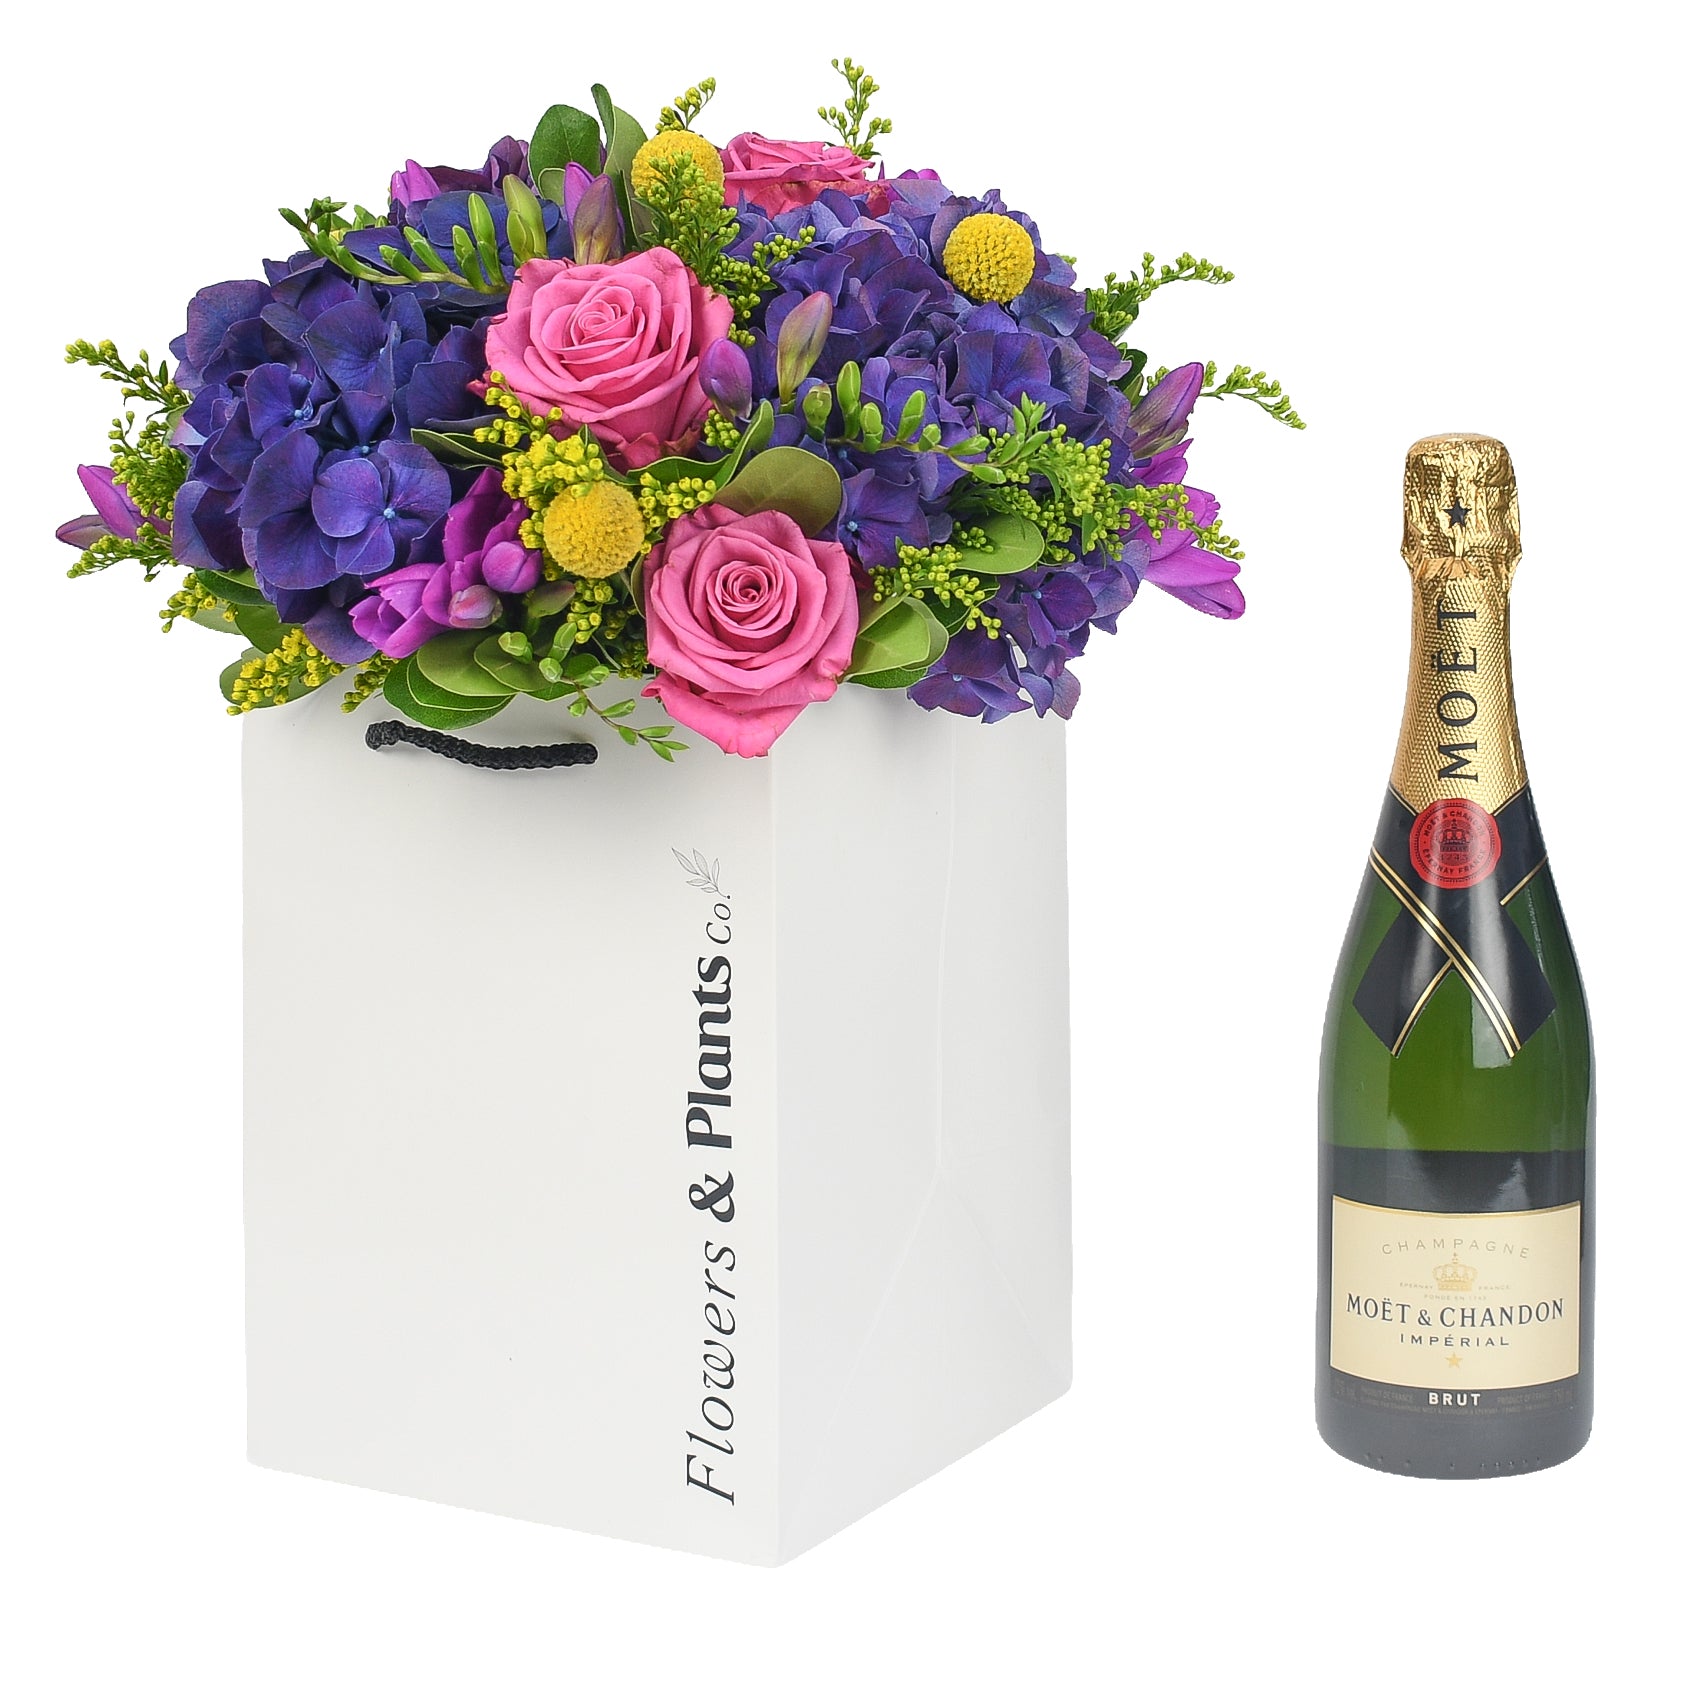 Send Romantic Flowers & Gifts to the UK | 1800Flowers.com